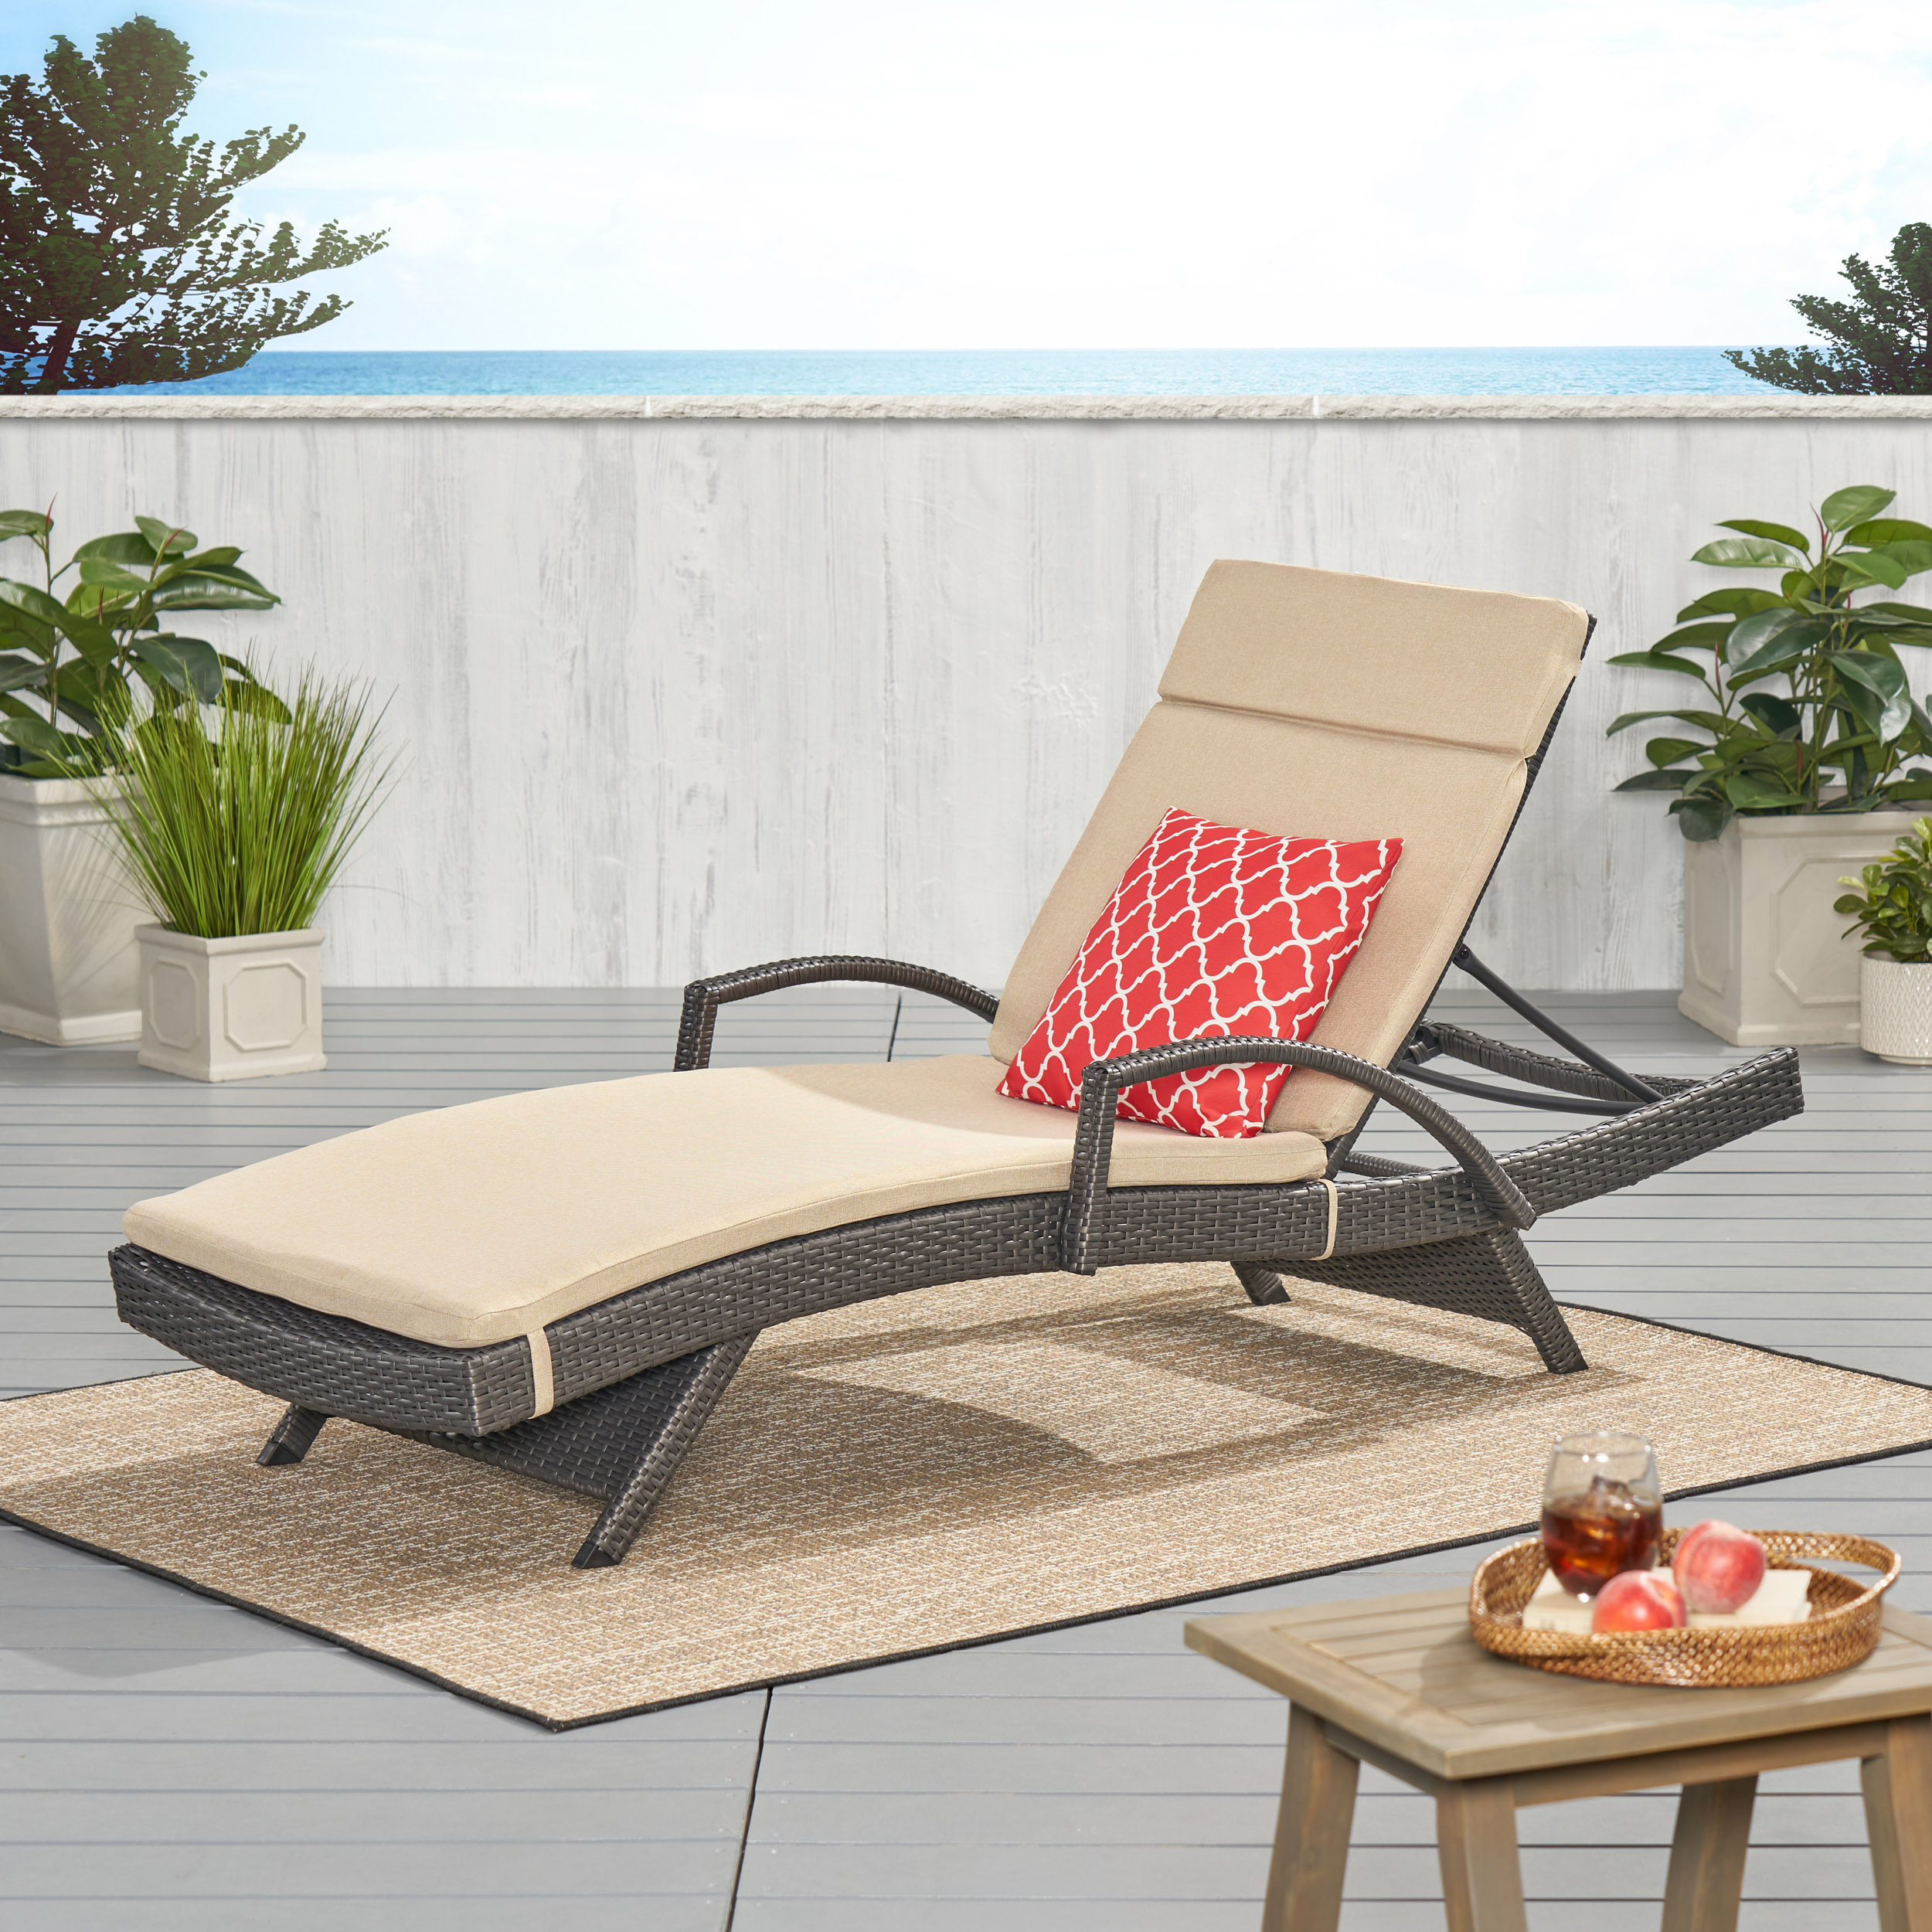 Solaris Outdoor Grey Wicker Armed Chaise Lounge With Water Resistant Cushion - Textured Beige